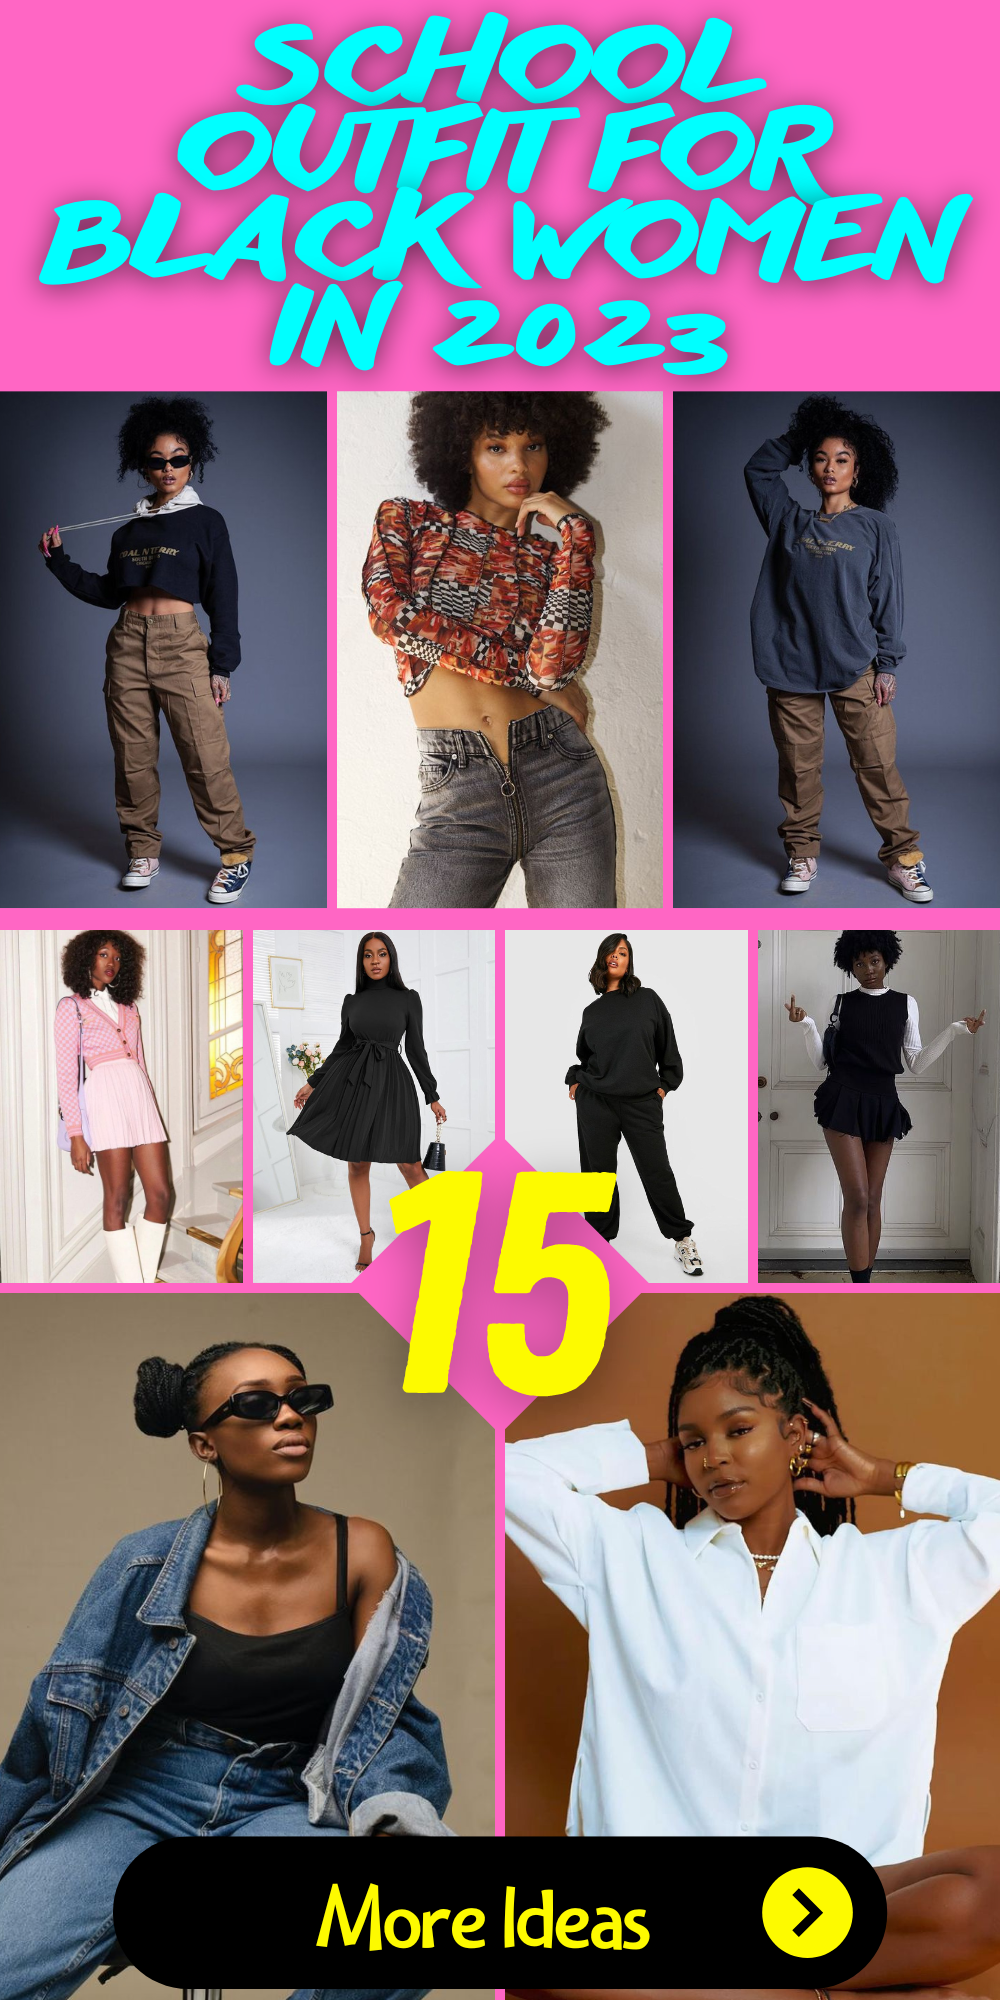 15 Trendy School Outfit Ideas for Black Women in 2023 - thepinkgoose.com